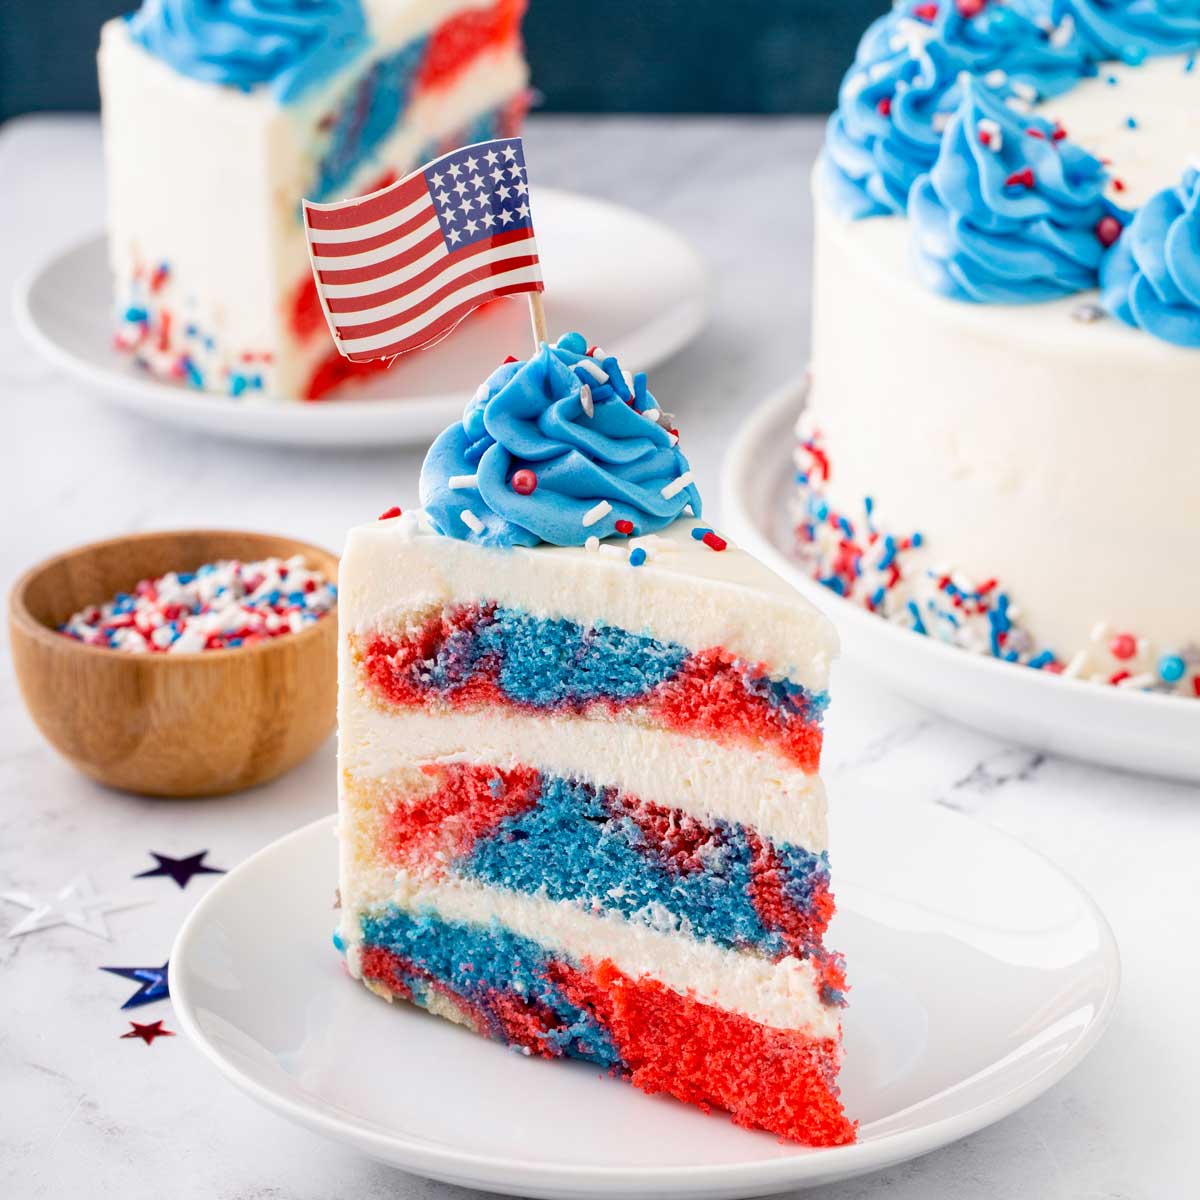 Sliced of Red White and Blue Marbled Layered Cake with frosting on a plate